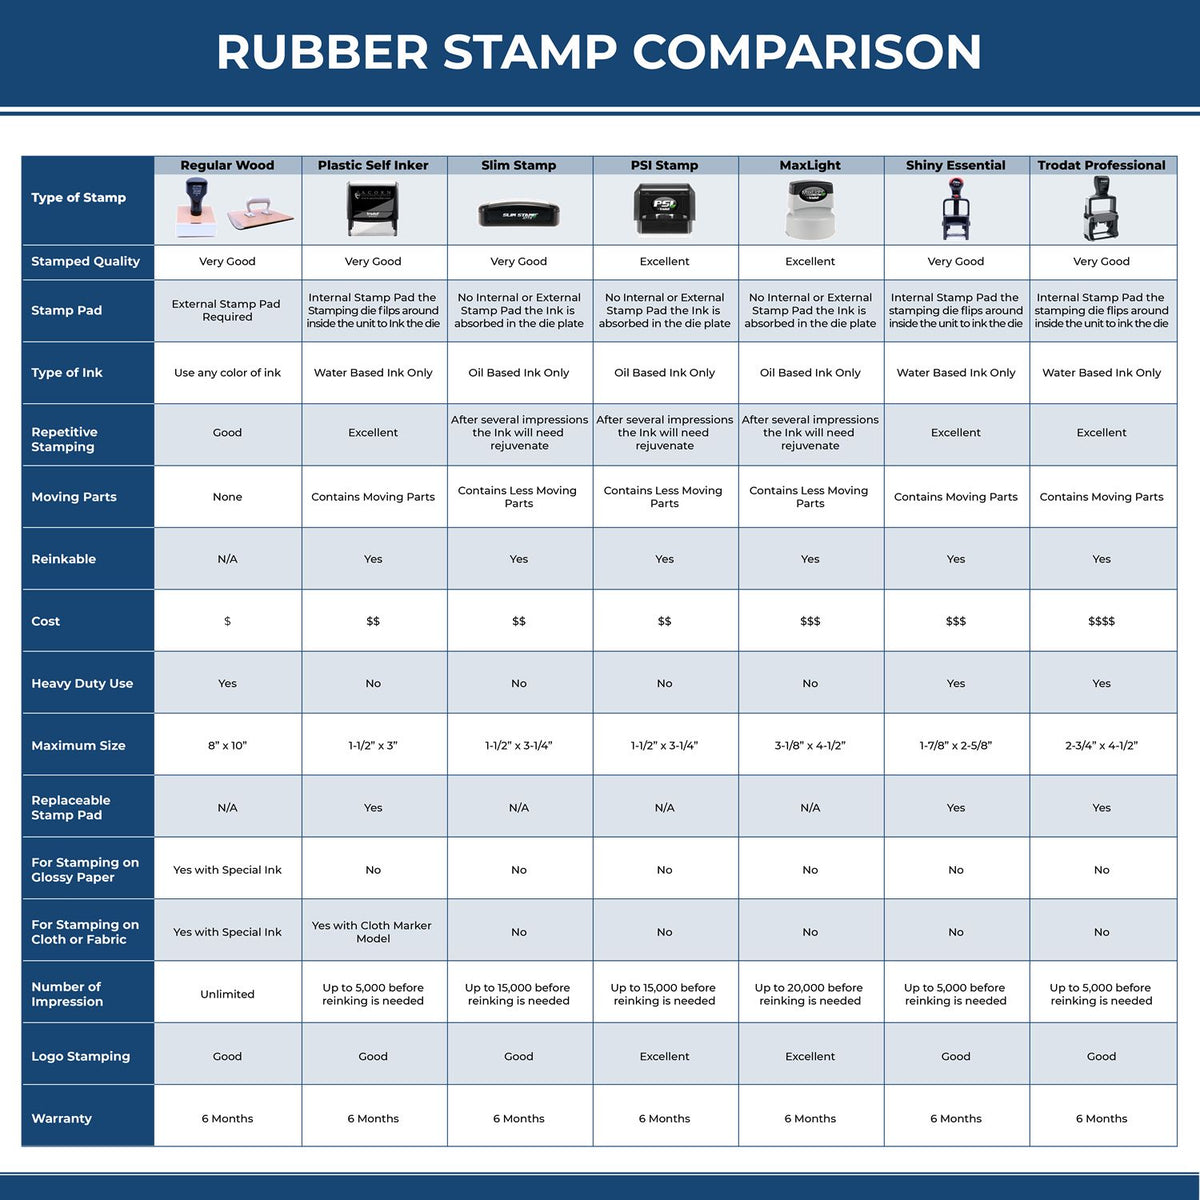 Large Self-Inking Bold Font File Stamp 4901S Rubber Stamp Comparison